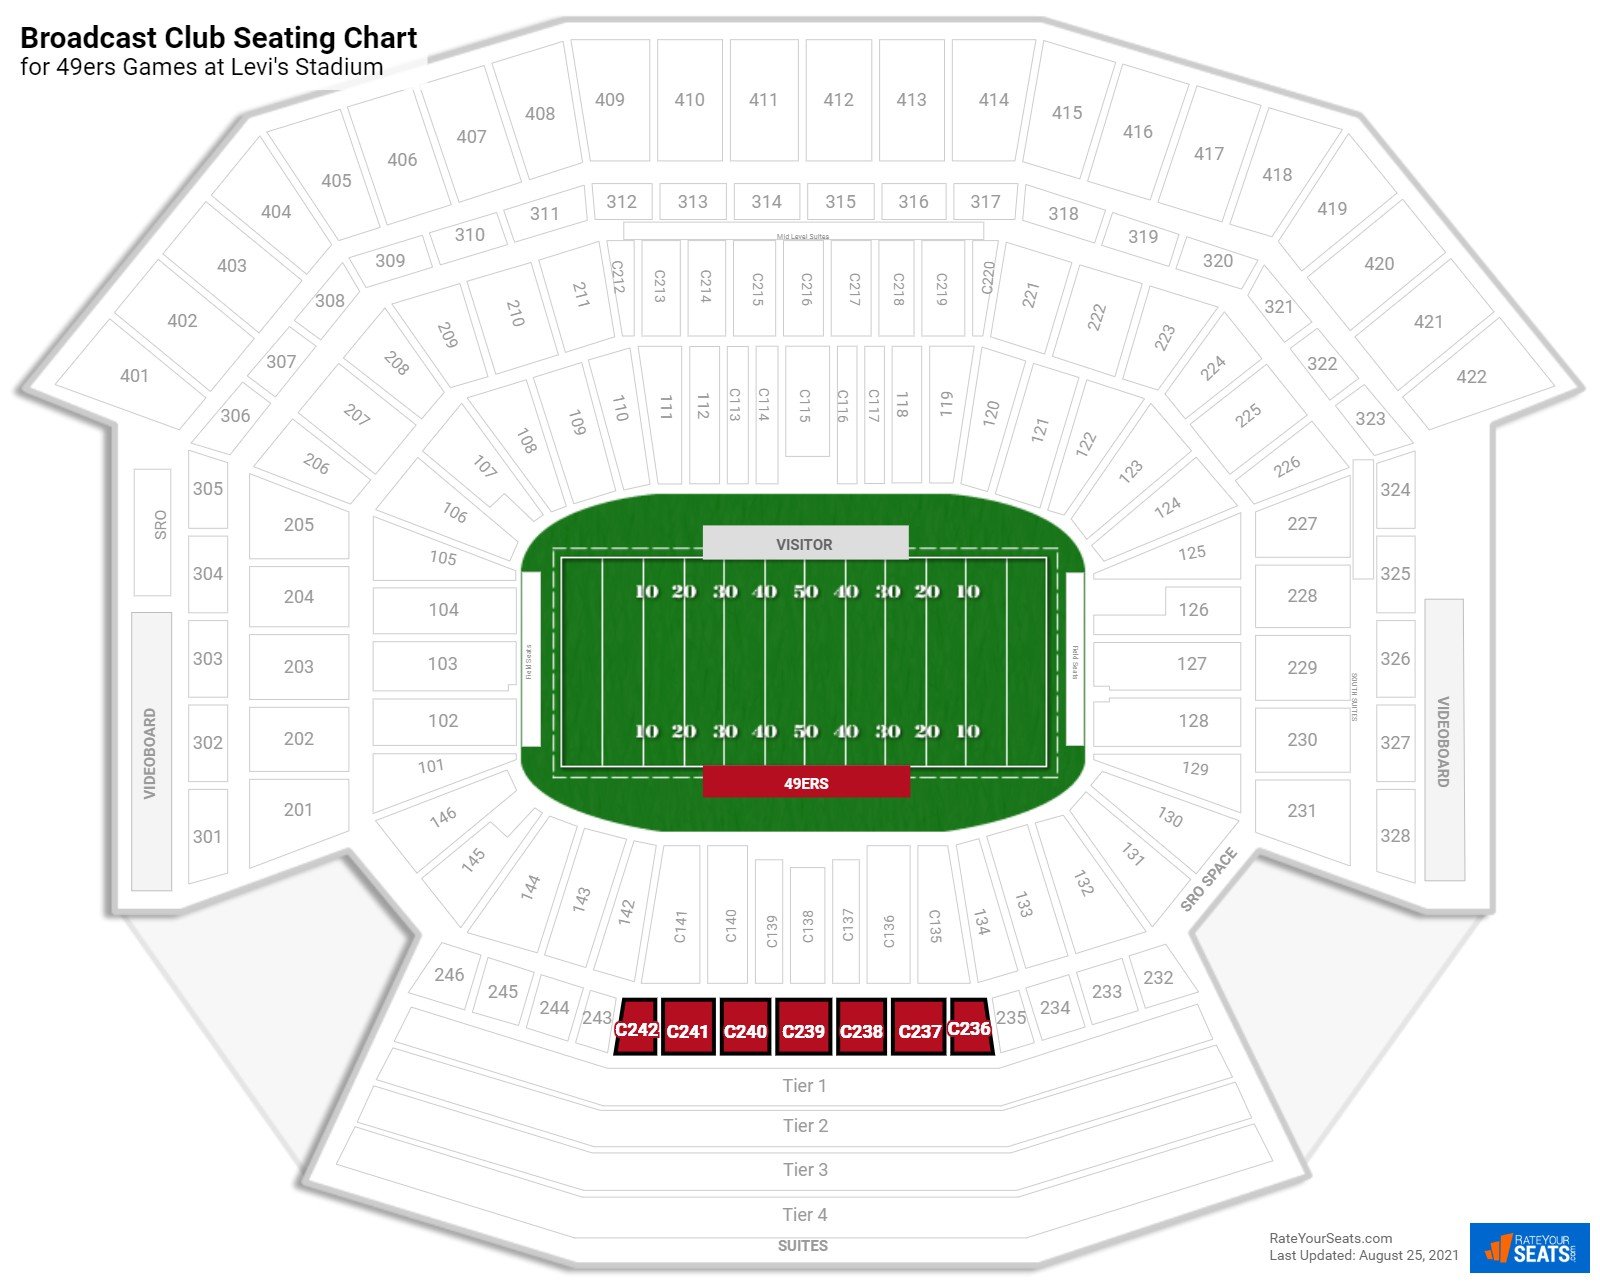 49ers Broadcast Club Seating Chart at Levi